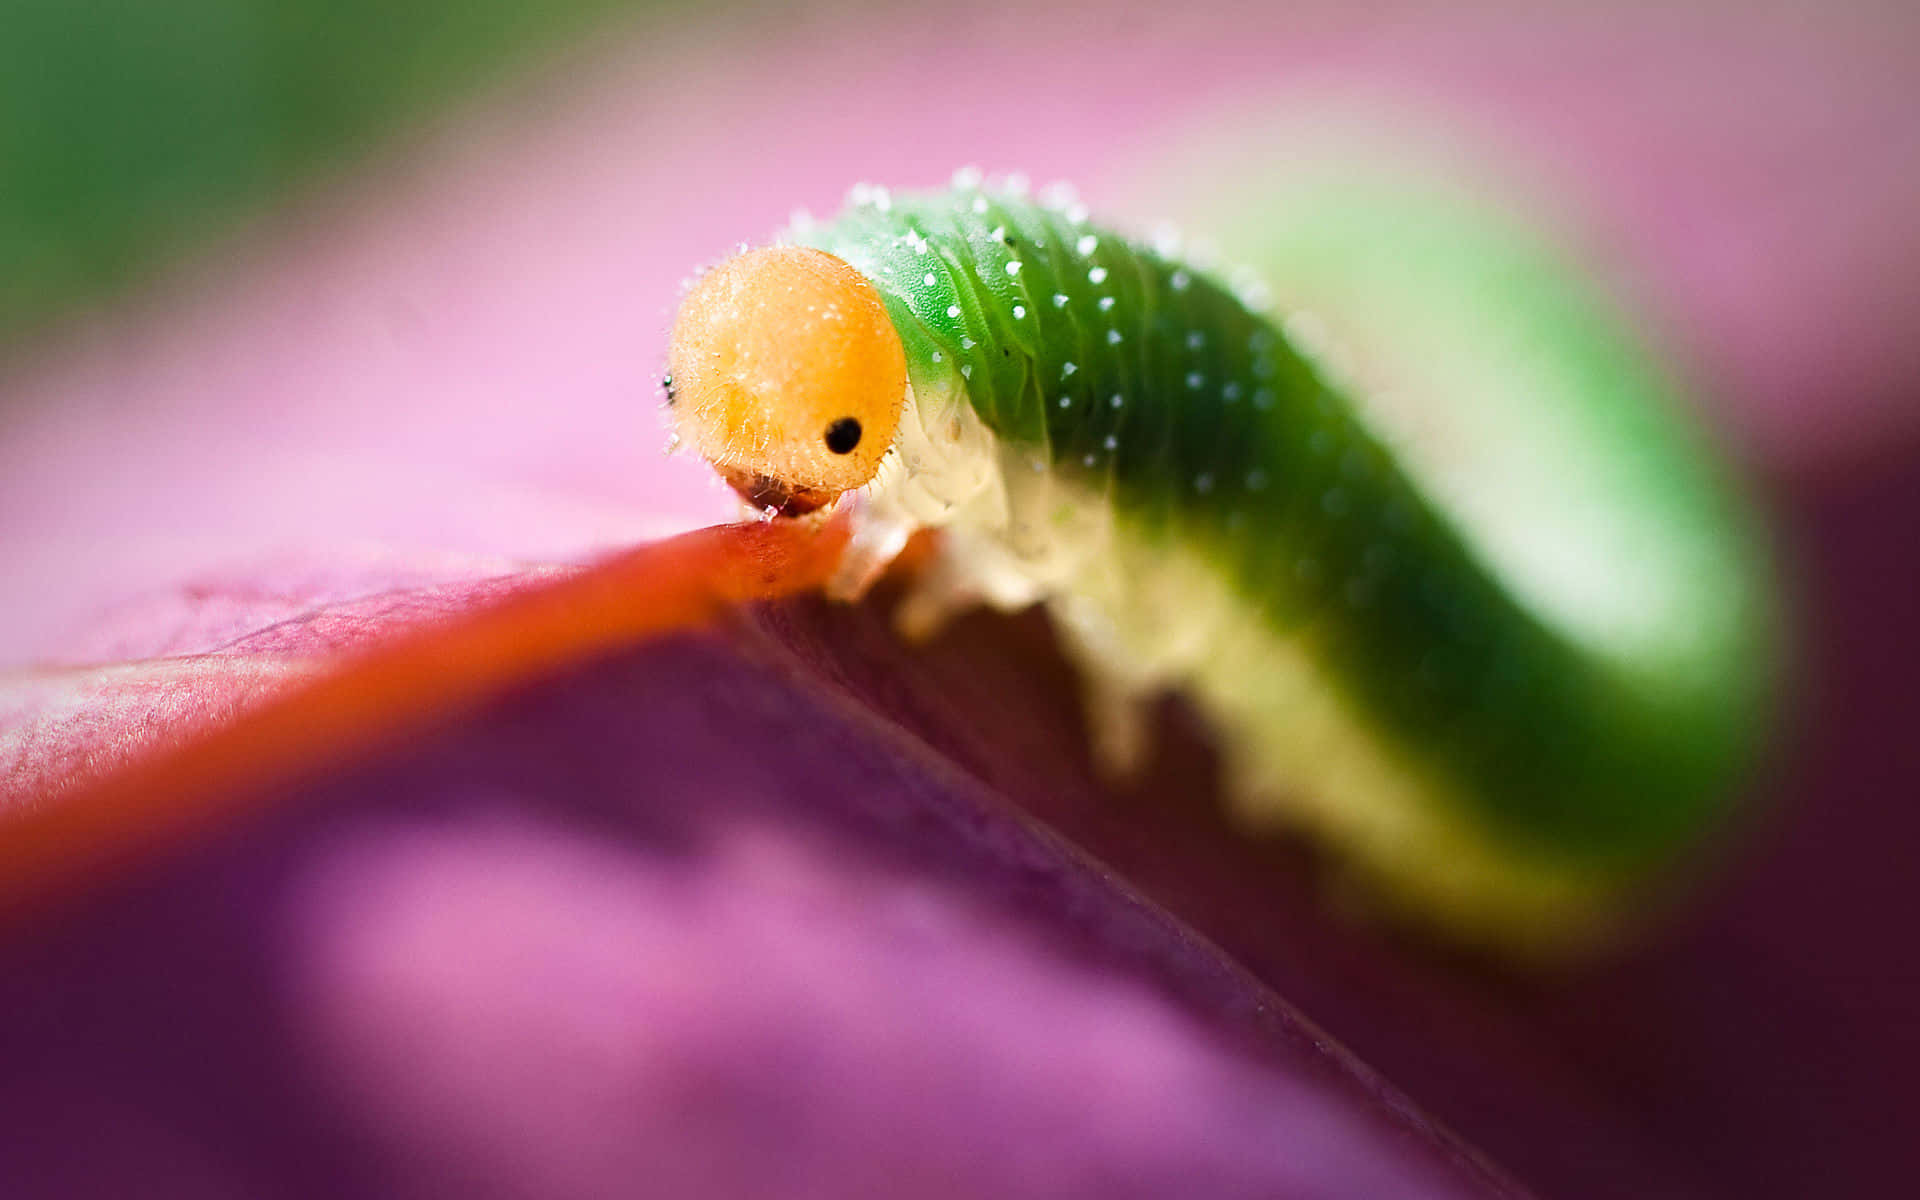 Check Out This Colorful Caterpillar Insect